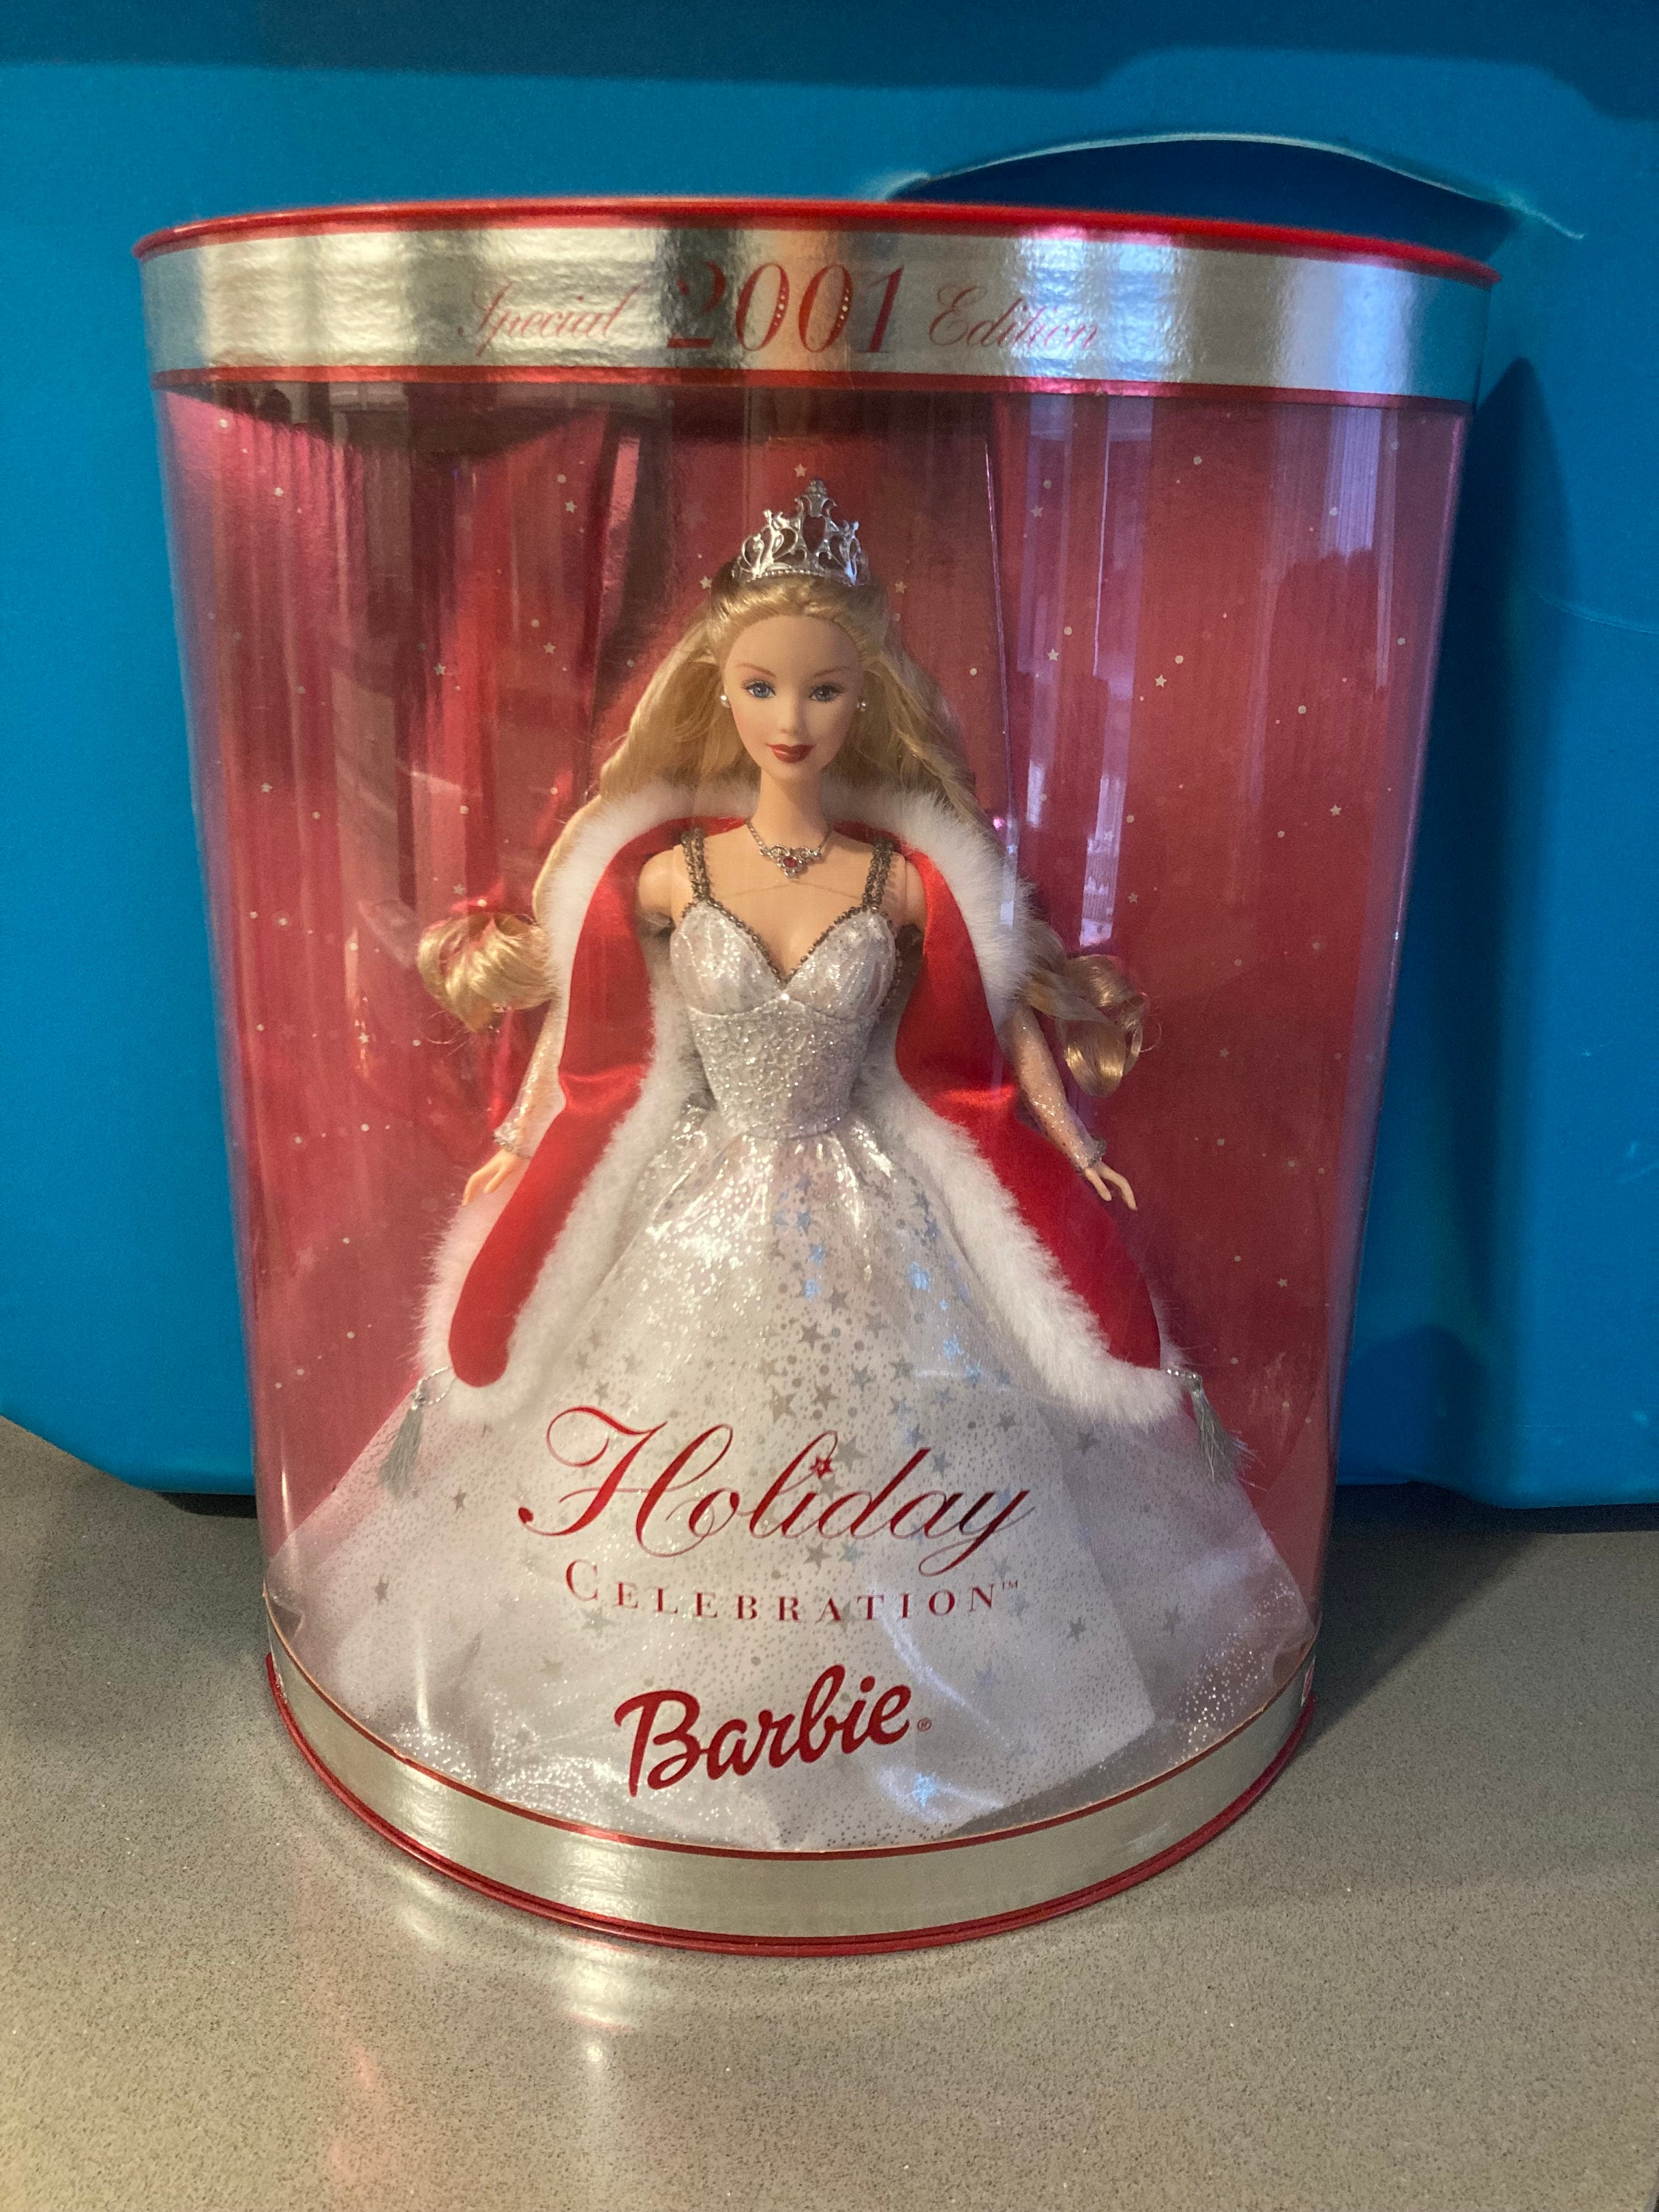 leven Flitsend Oceaan Holiday Celebration Barbie 2001 50304 Special Edition New - Etsy